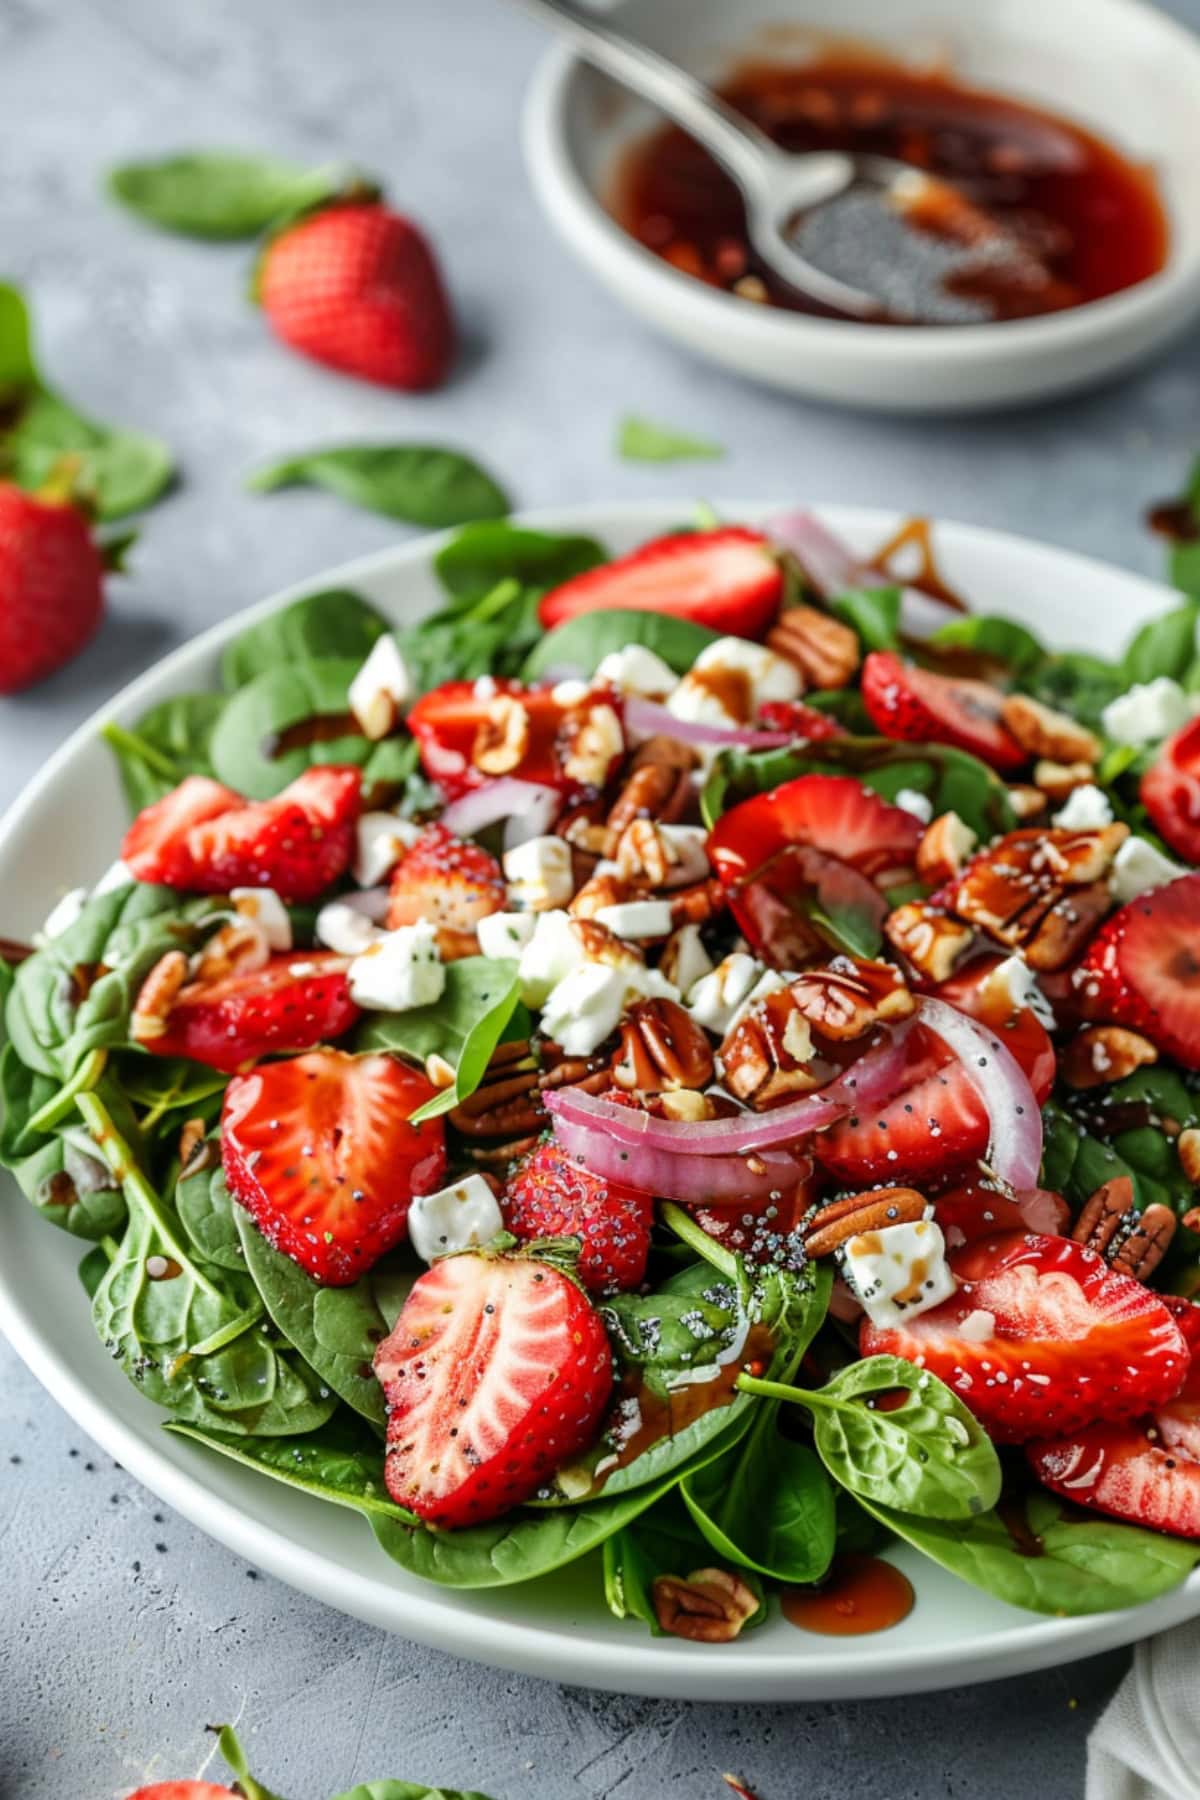 Sliced strawberries, baby spinach, chopped pecans and crumbled feta drizzled with poppy seeds dressing served in a white plate.